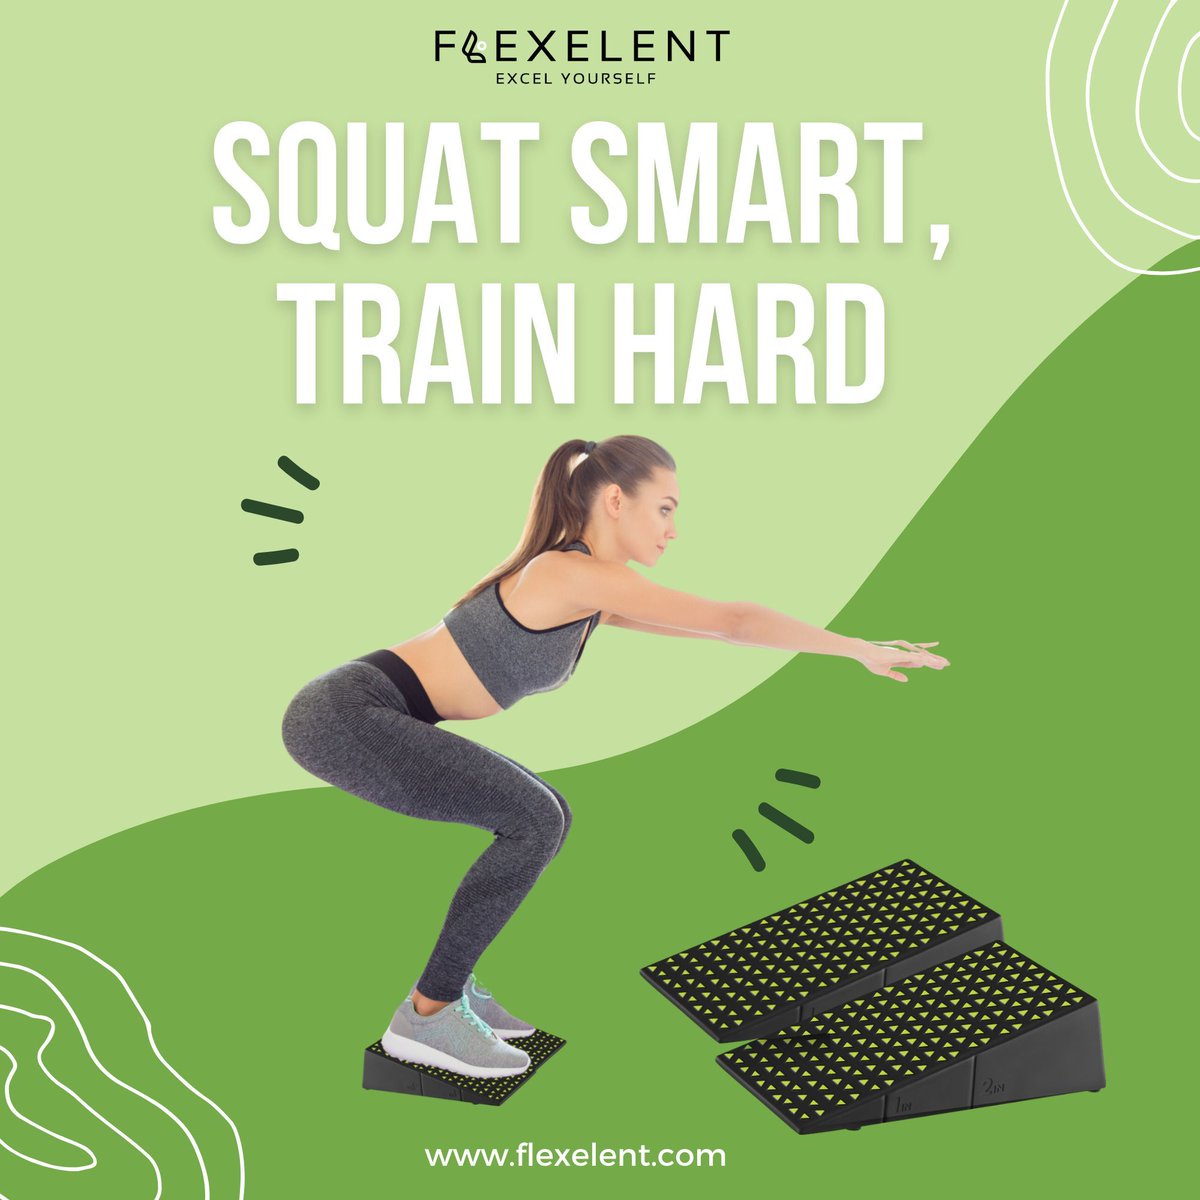 Transform your training with 'Squat Smart, Train Hard'! 💪 Flexelent Squat Wedges are back! Get the gear that keeps up with your grind. Hit up buff.ly/3wgJWmw now! #SquatSmart #TrainHard #Flexelent #BackInStock #FitnessGear #GymLife #SquatGoals